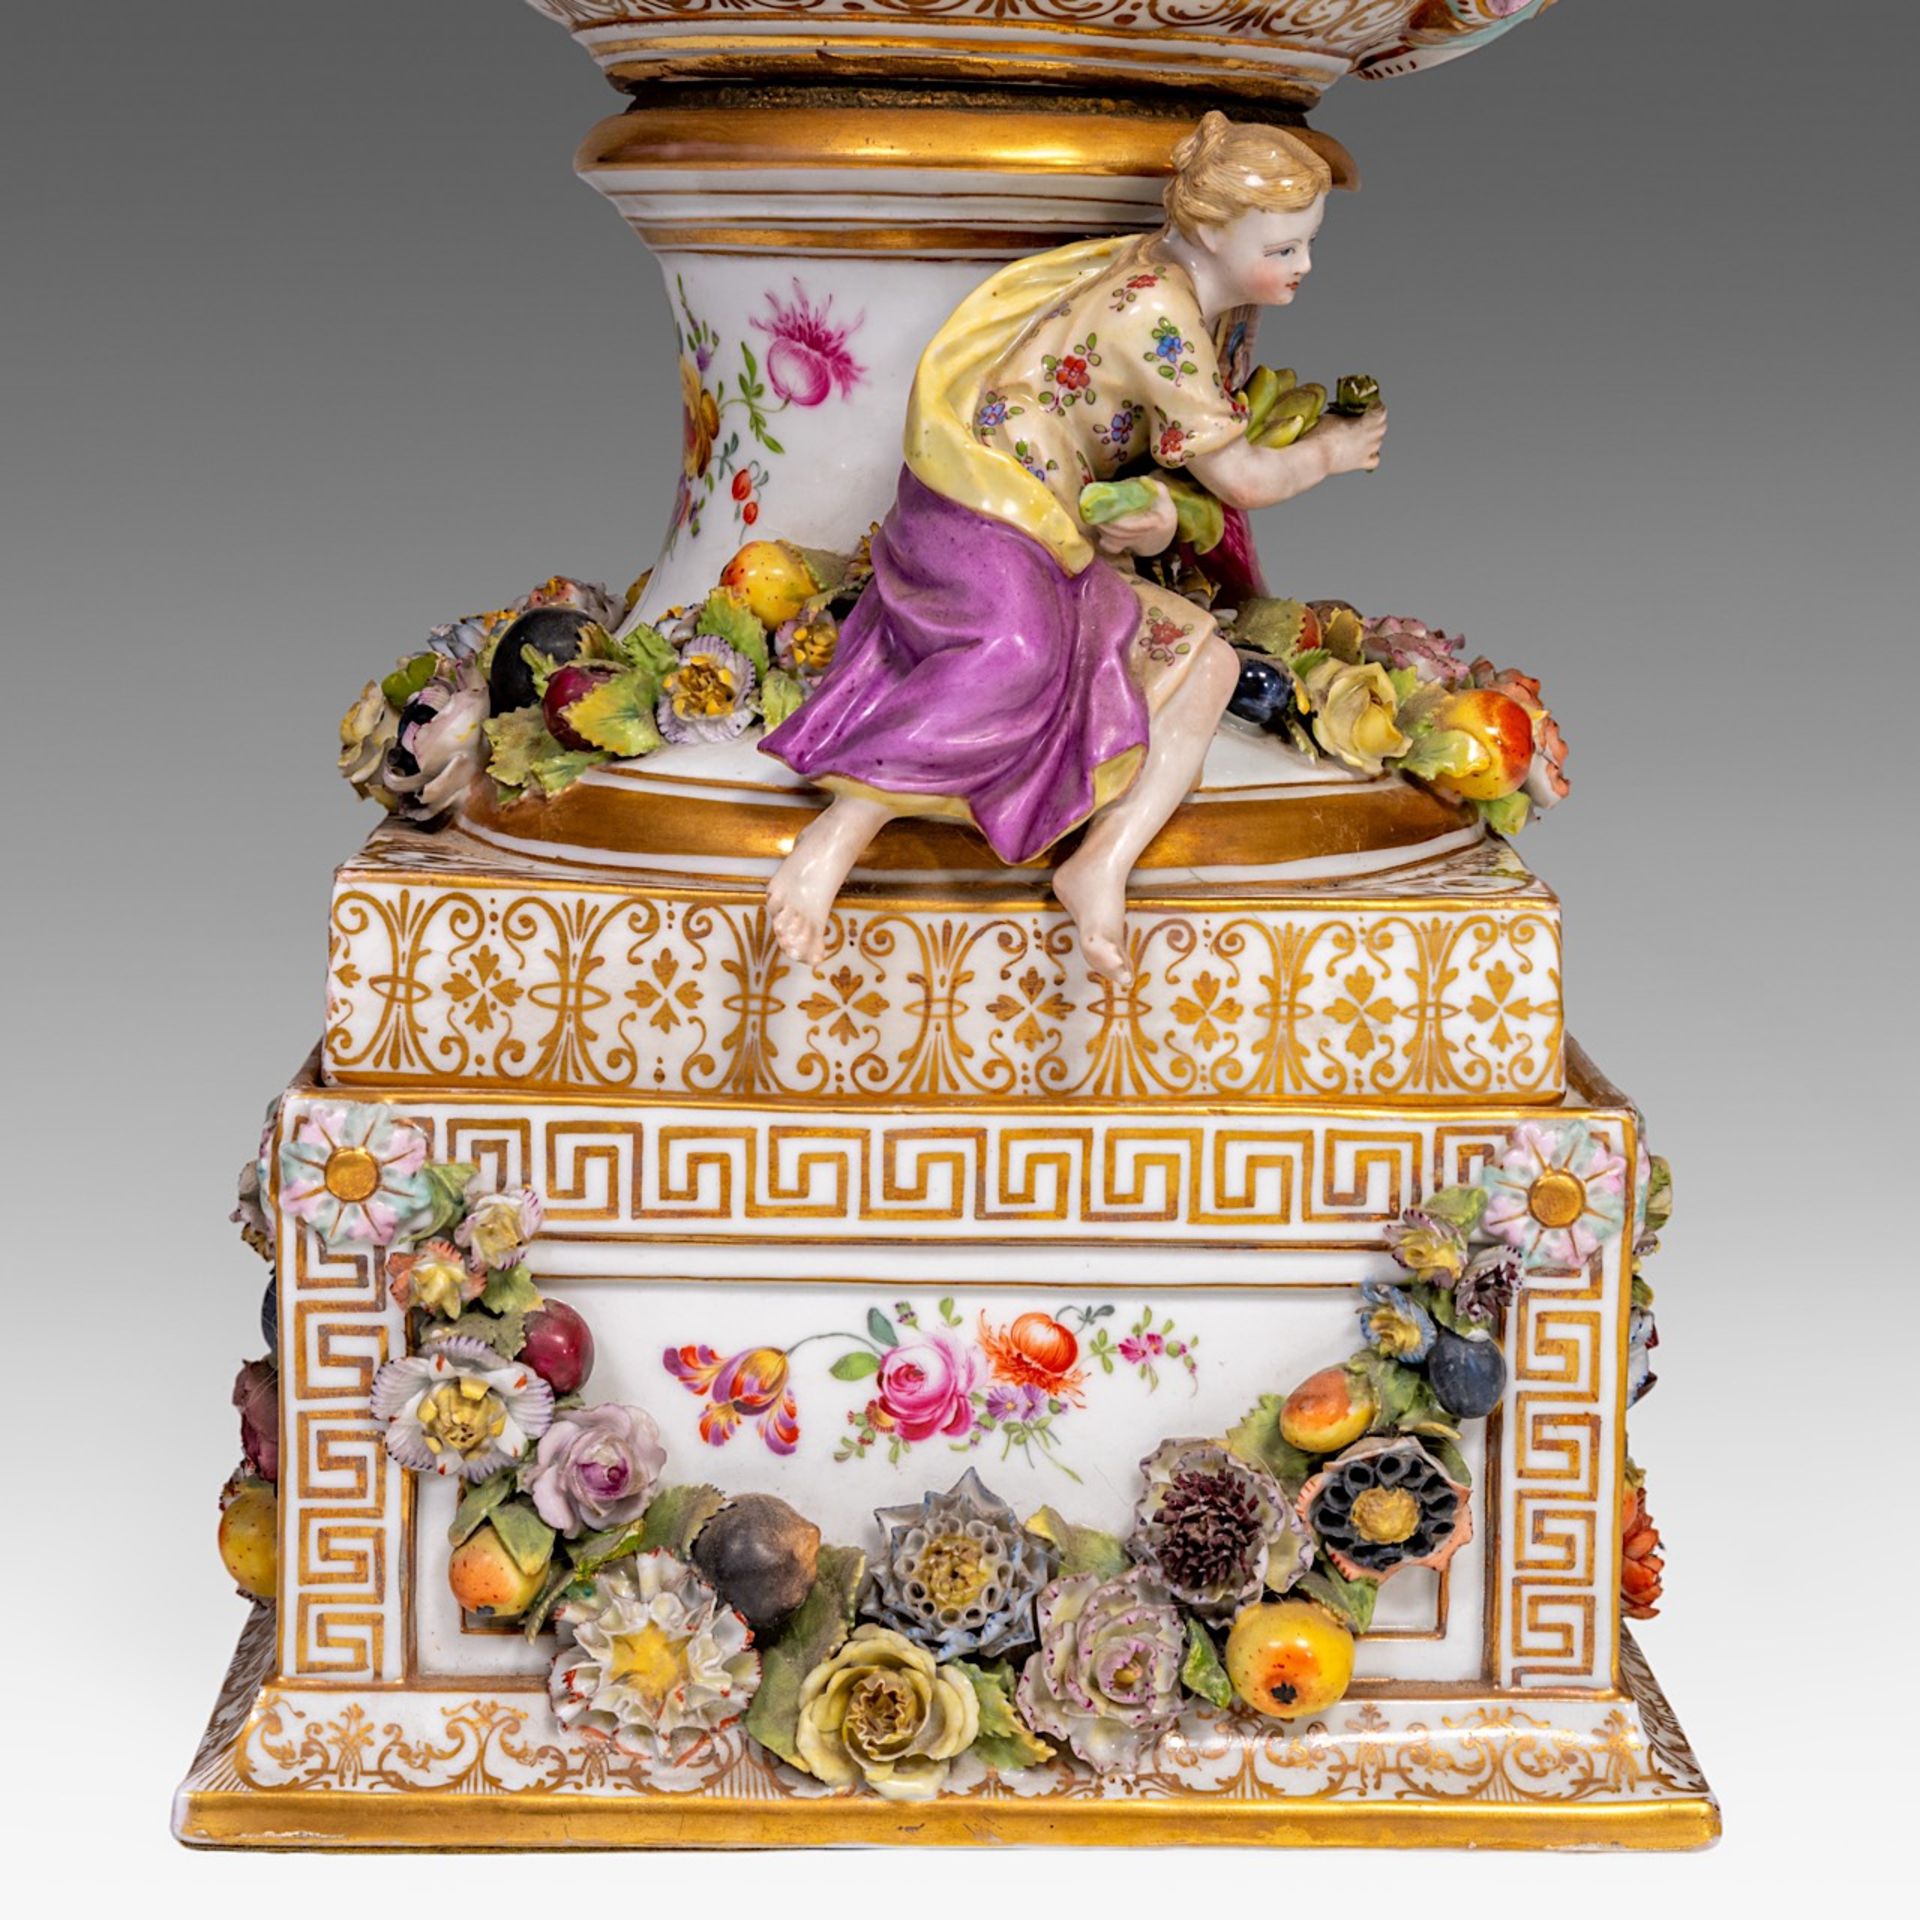 A very imposing Saxony porcelain vase on stand, Postschappel manufactory, Dresden, H 107 cm (total) - Image 19 of 23